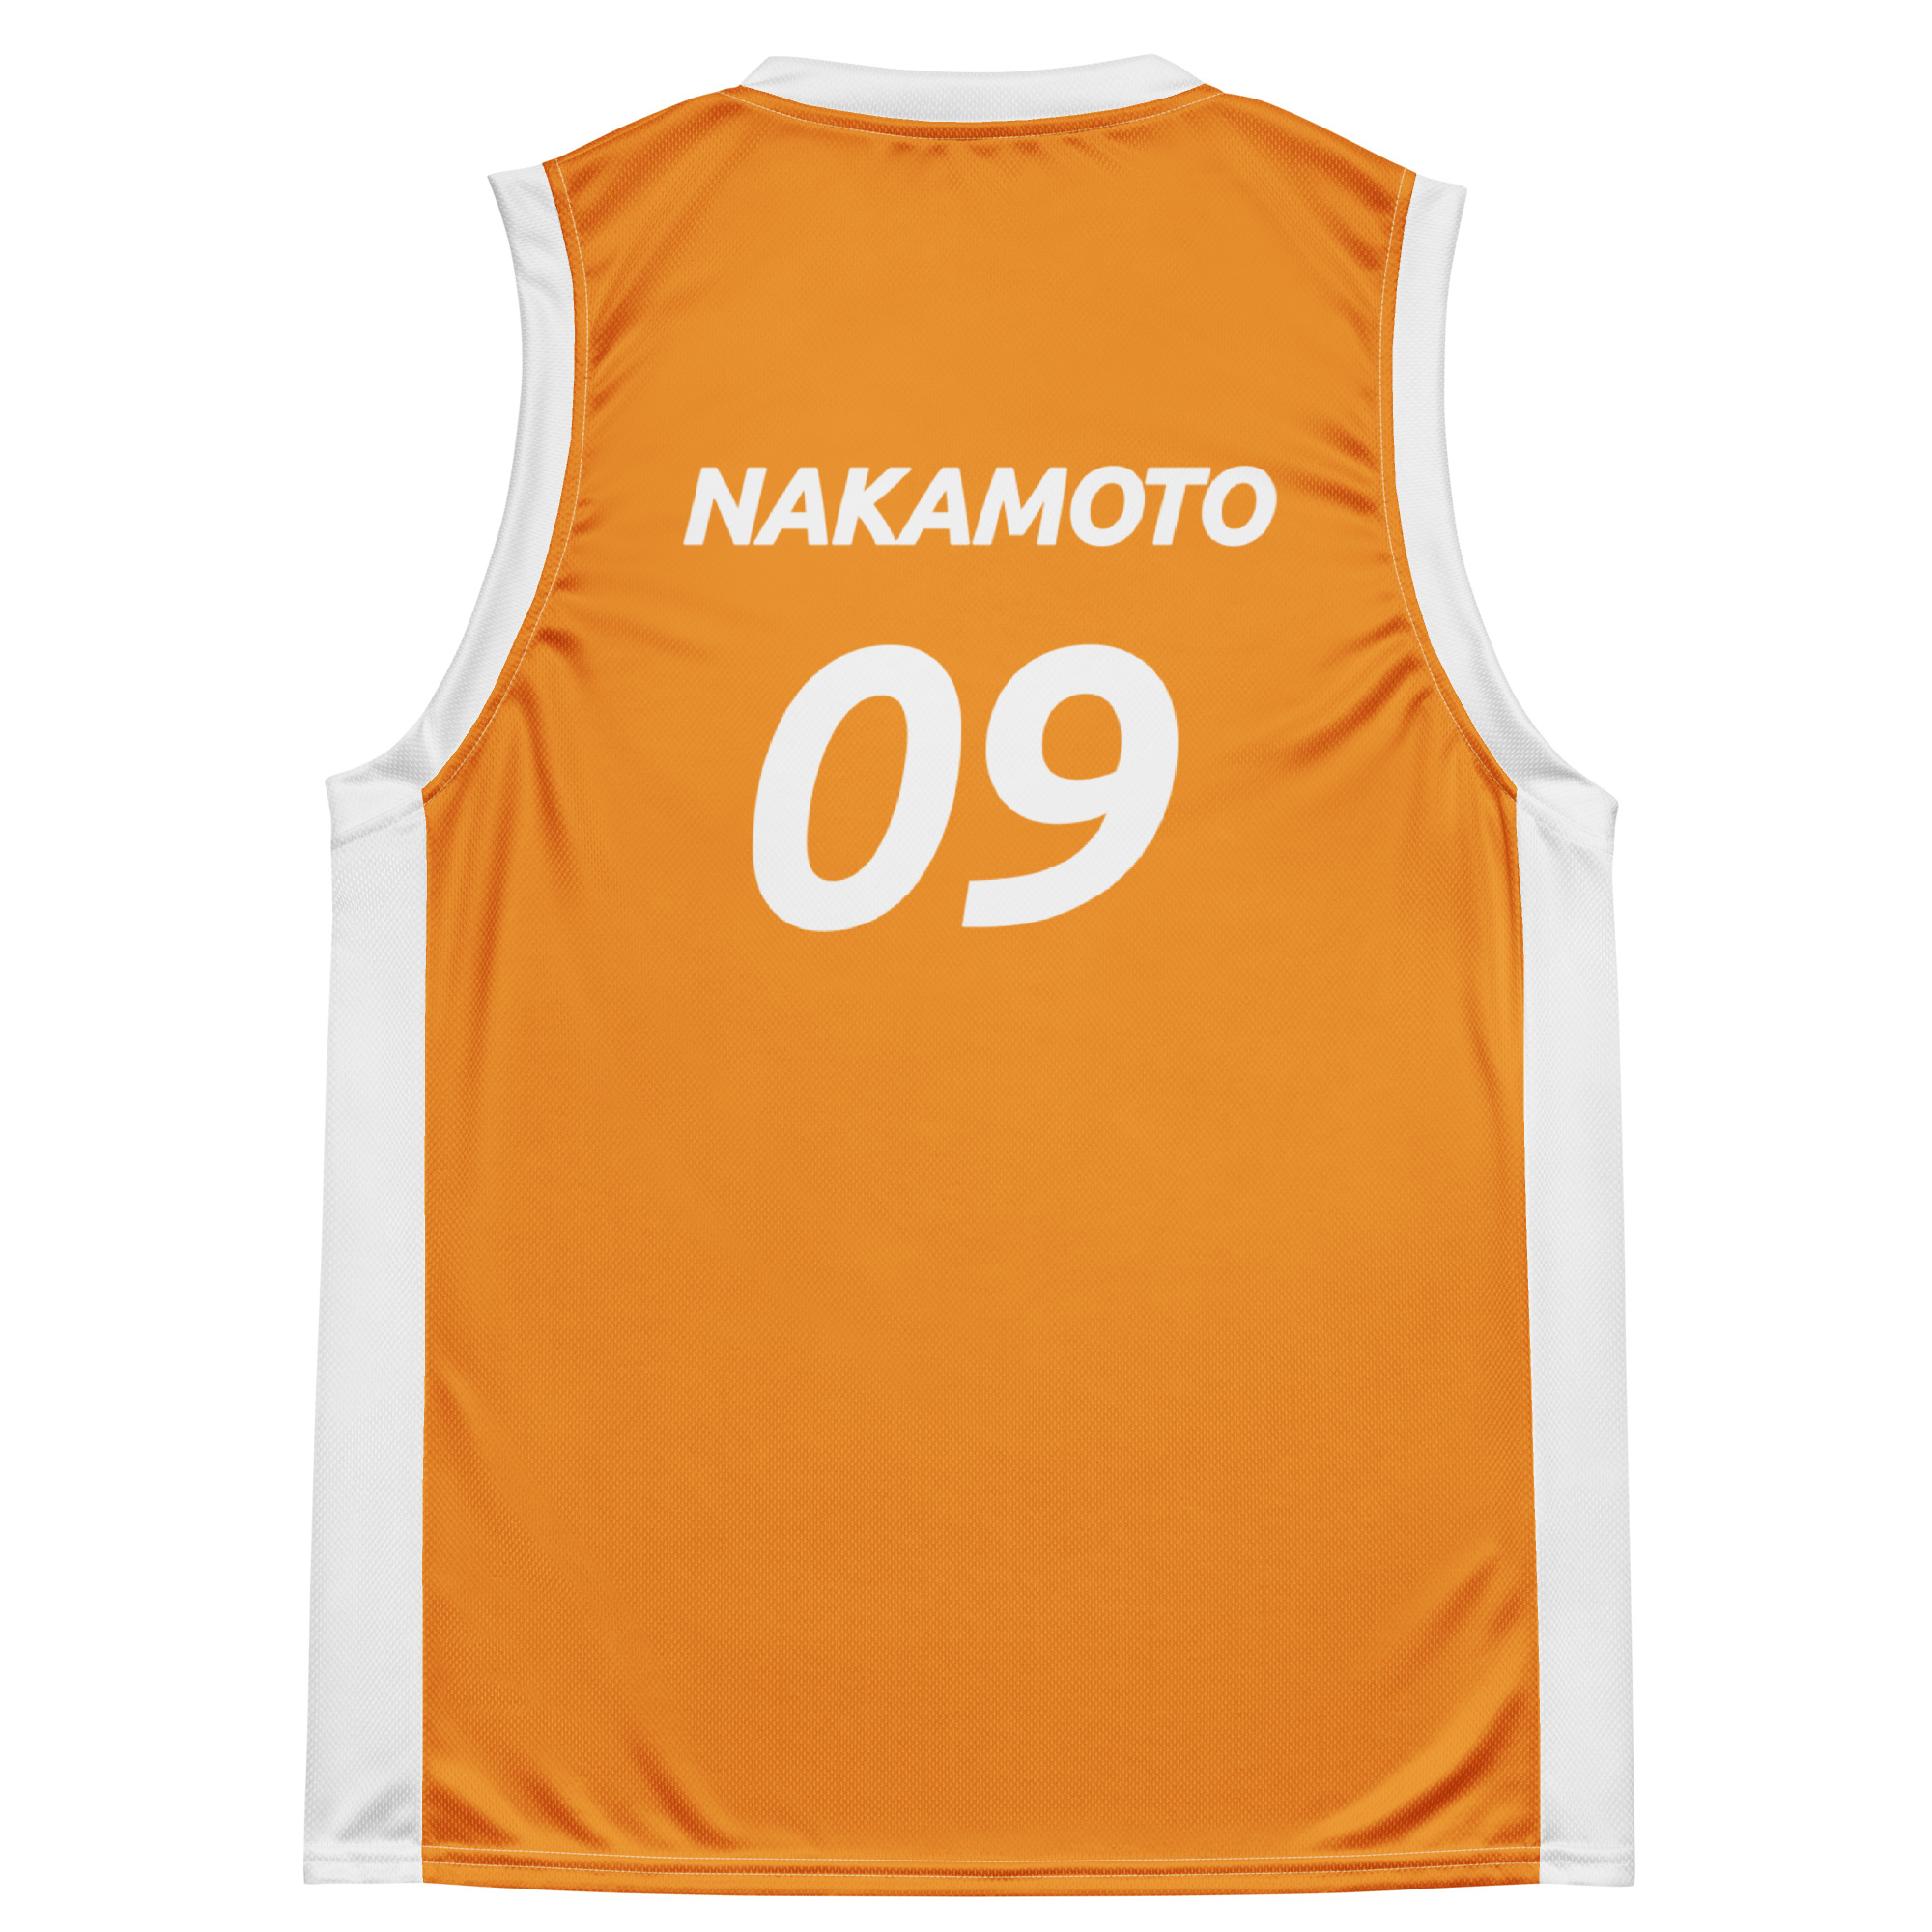 Back view of the Official Bitcoin Basketball Jersey. In bitcoin orange color, featuring the name "Nakamoto" across the top, the number 09 in the center. In Ubuntu bold italic font, the font of the official bitcoin logo.